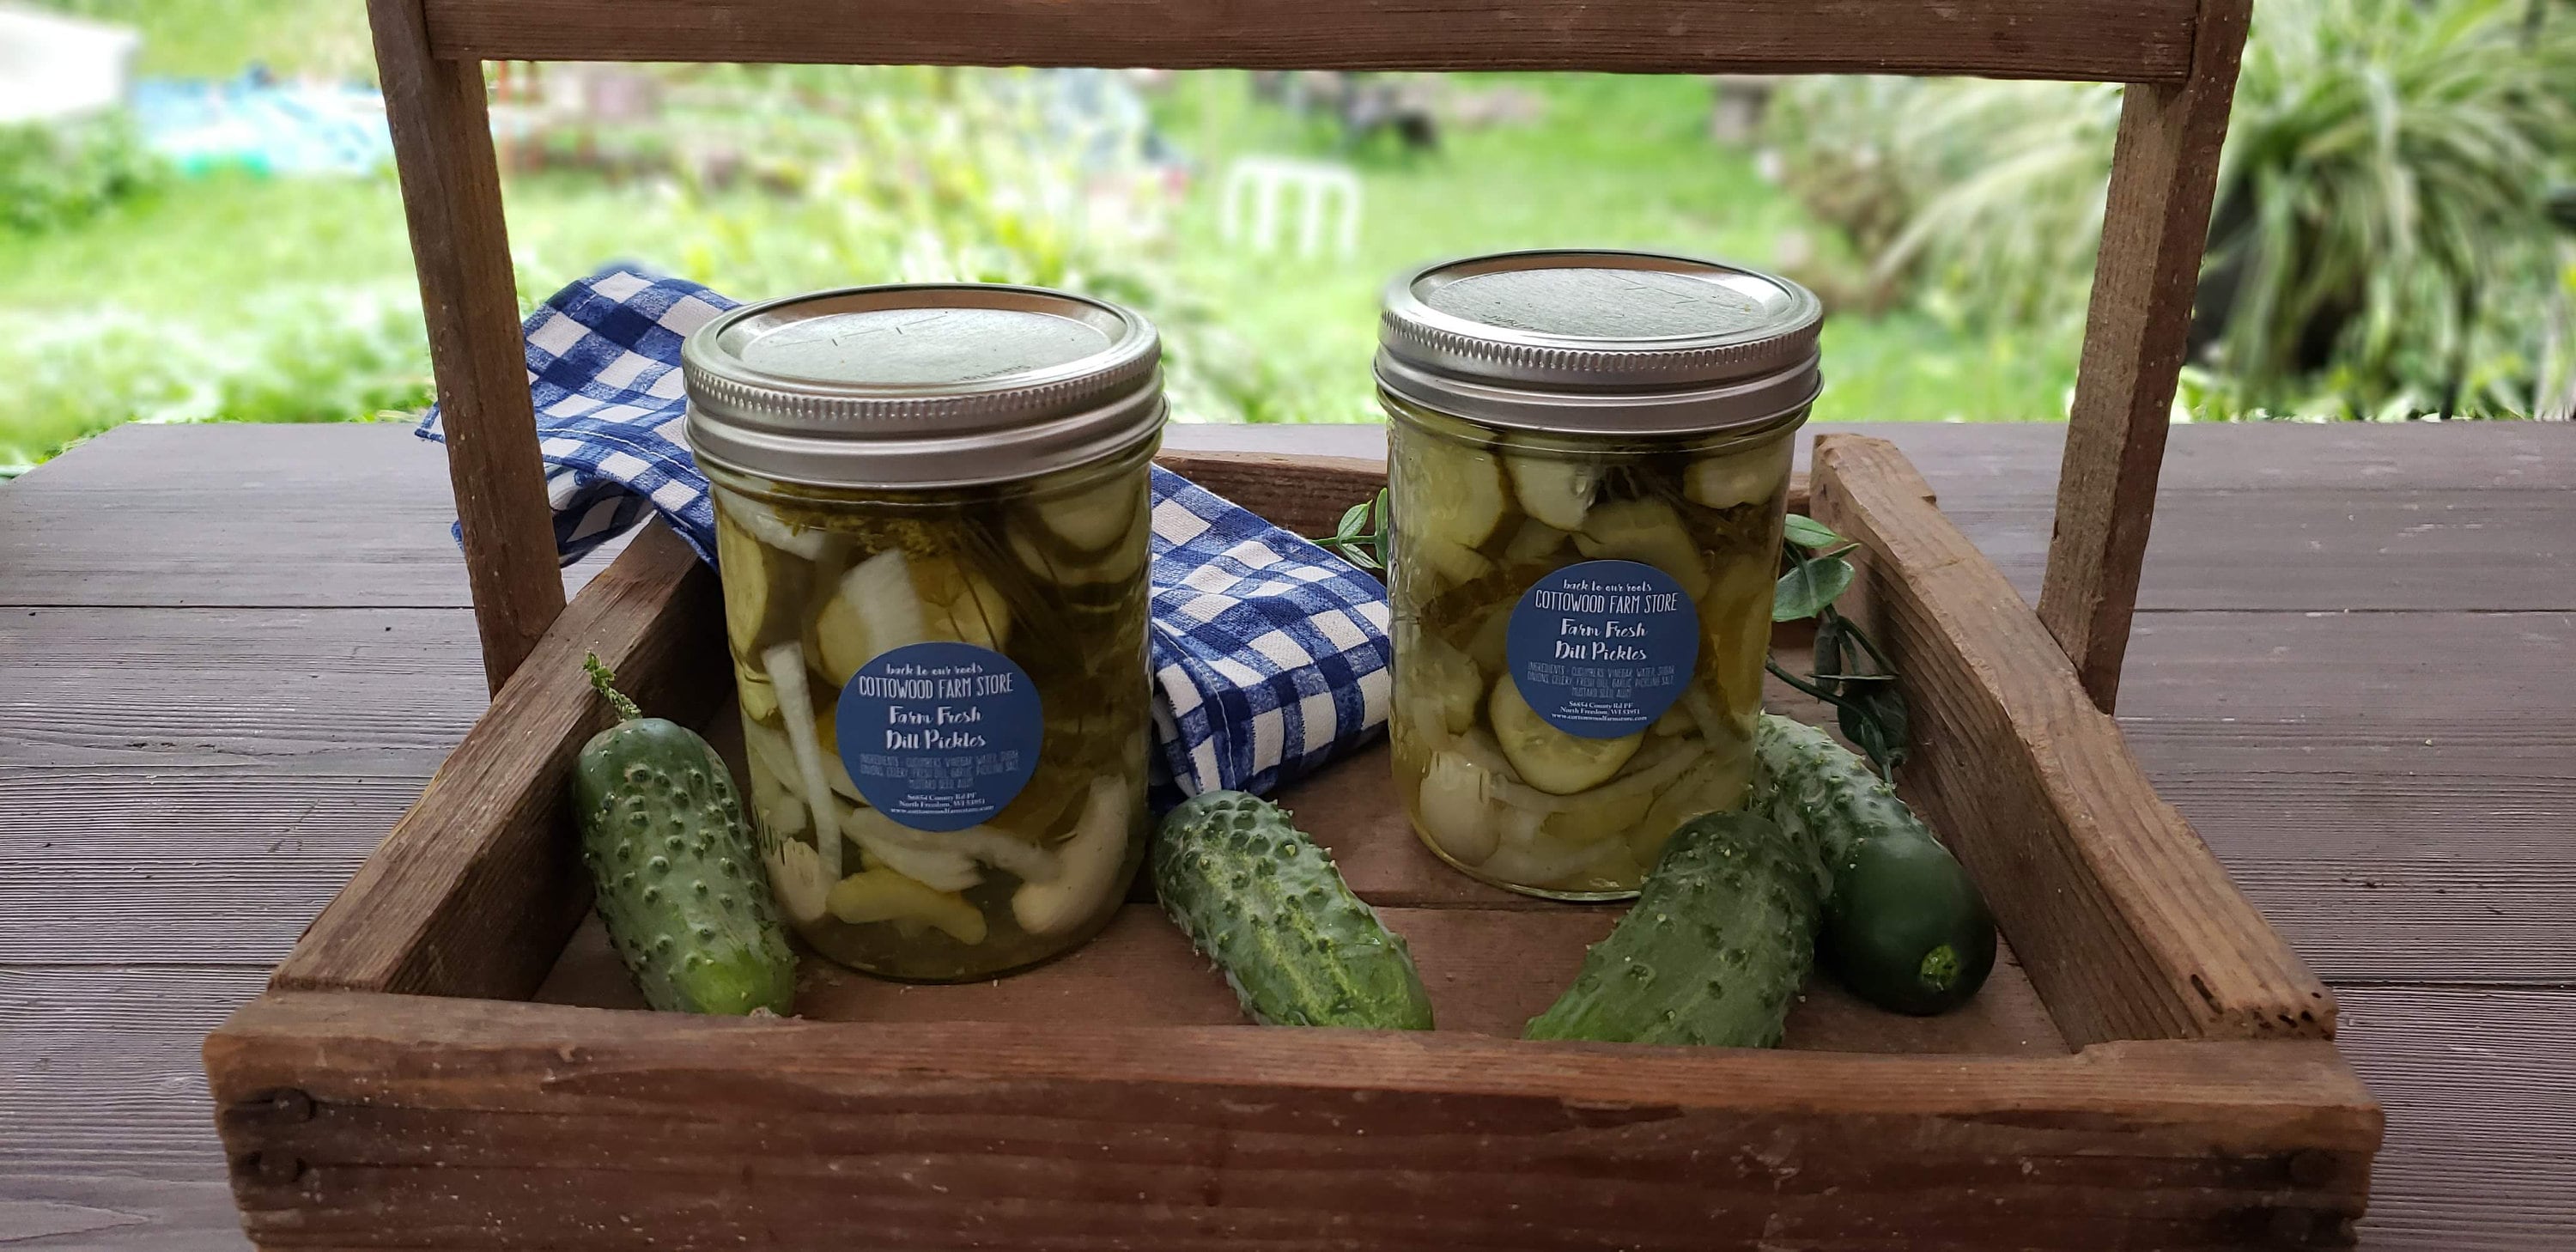 Pickle Gifts: 15 Dill-ightful Ideas for the Pickle Lovers in Your Life